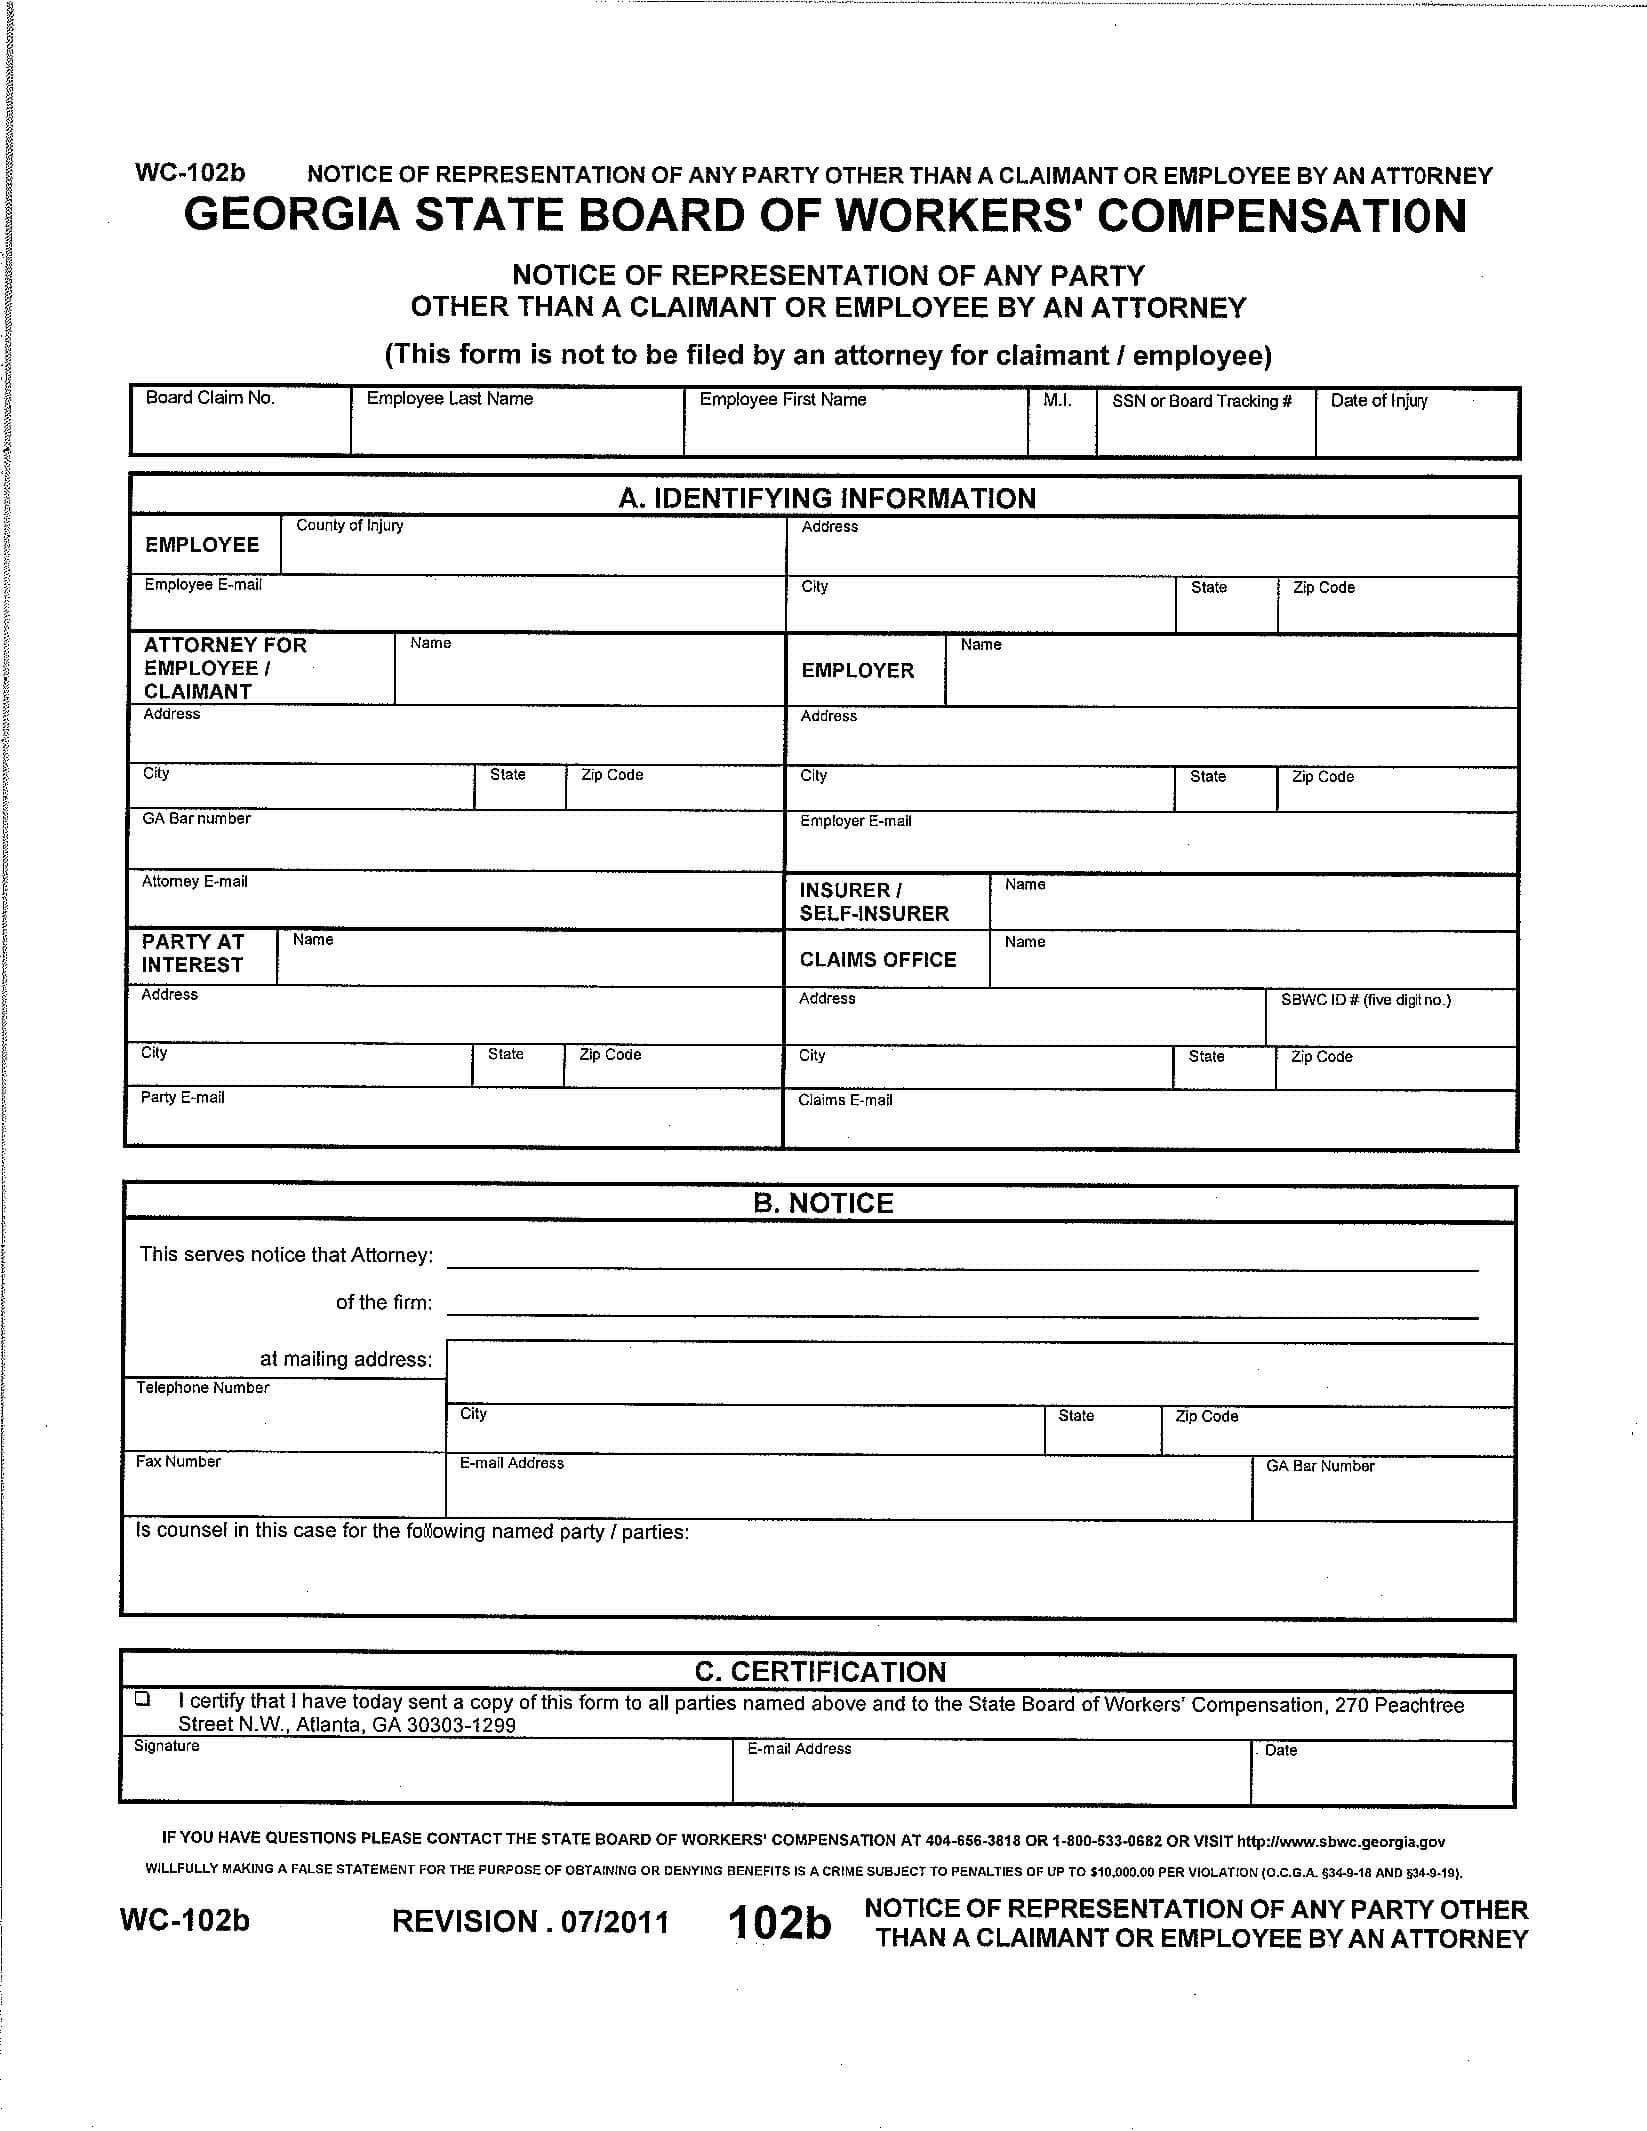 georgia-workers-compensation-forms-wc-102-and-wc-108